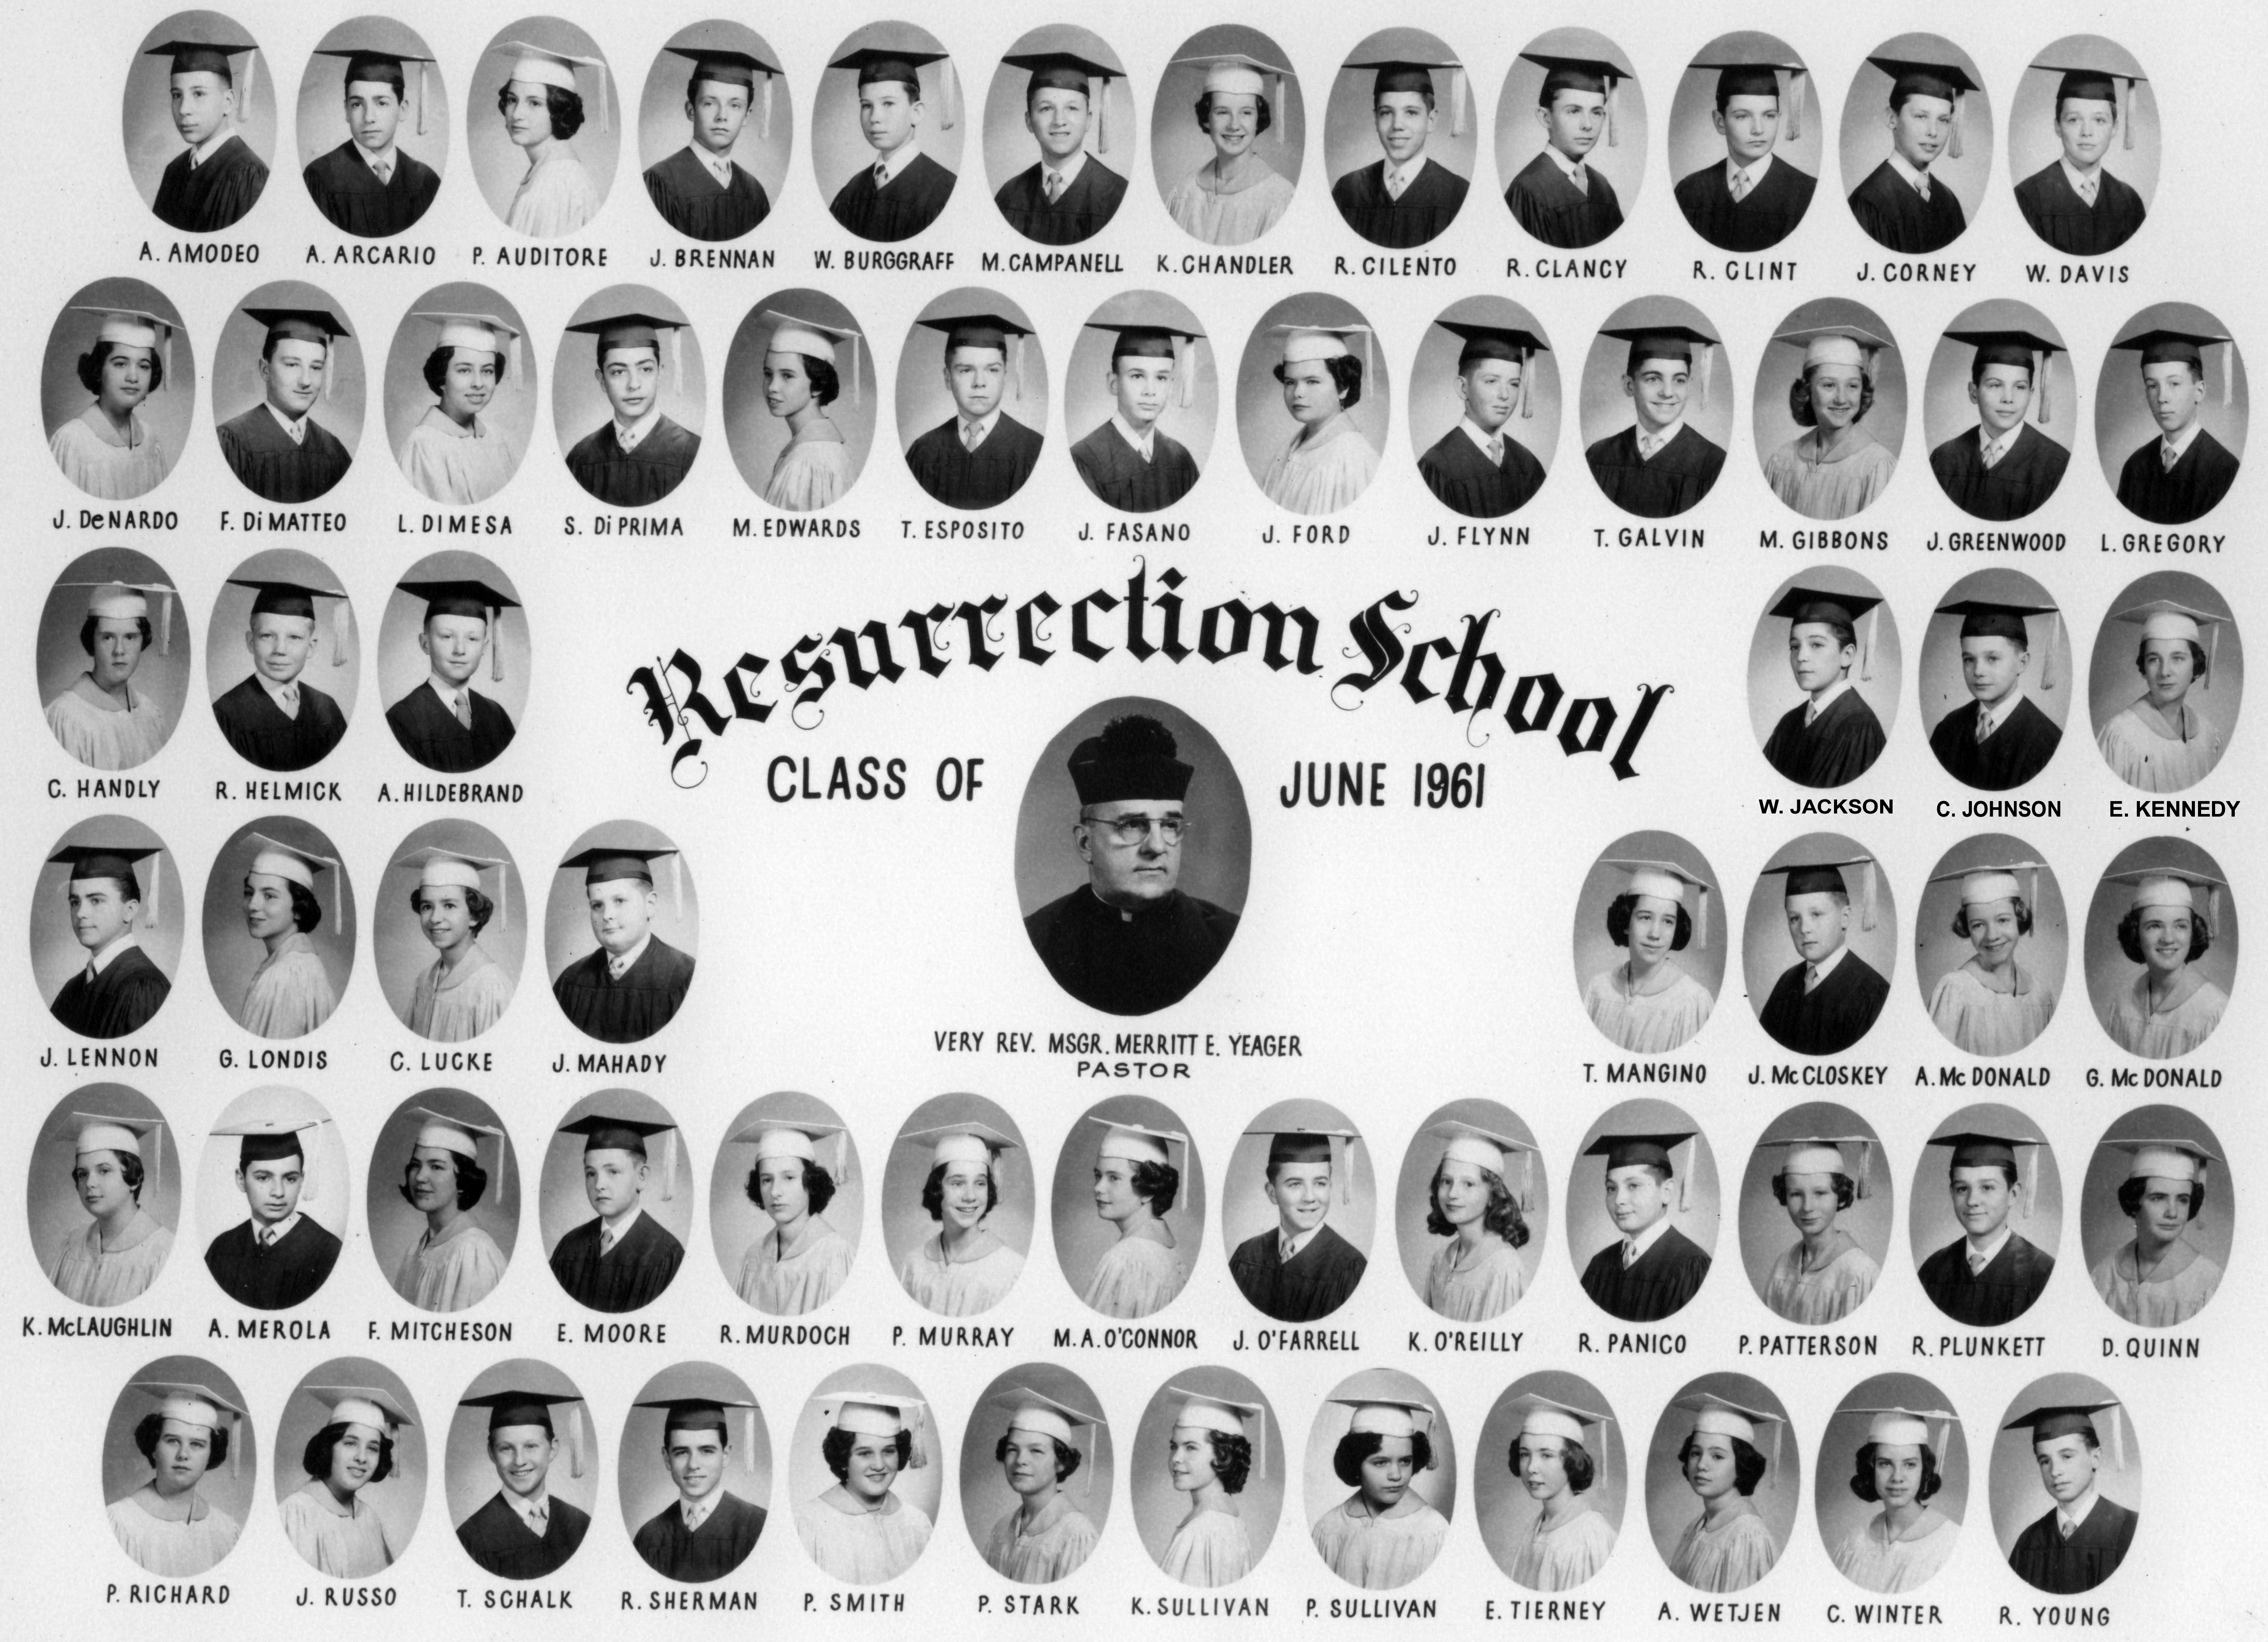 Enlarged
Resurrection Class of June 1961, Group B